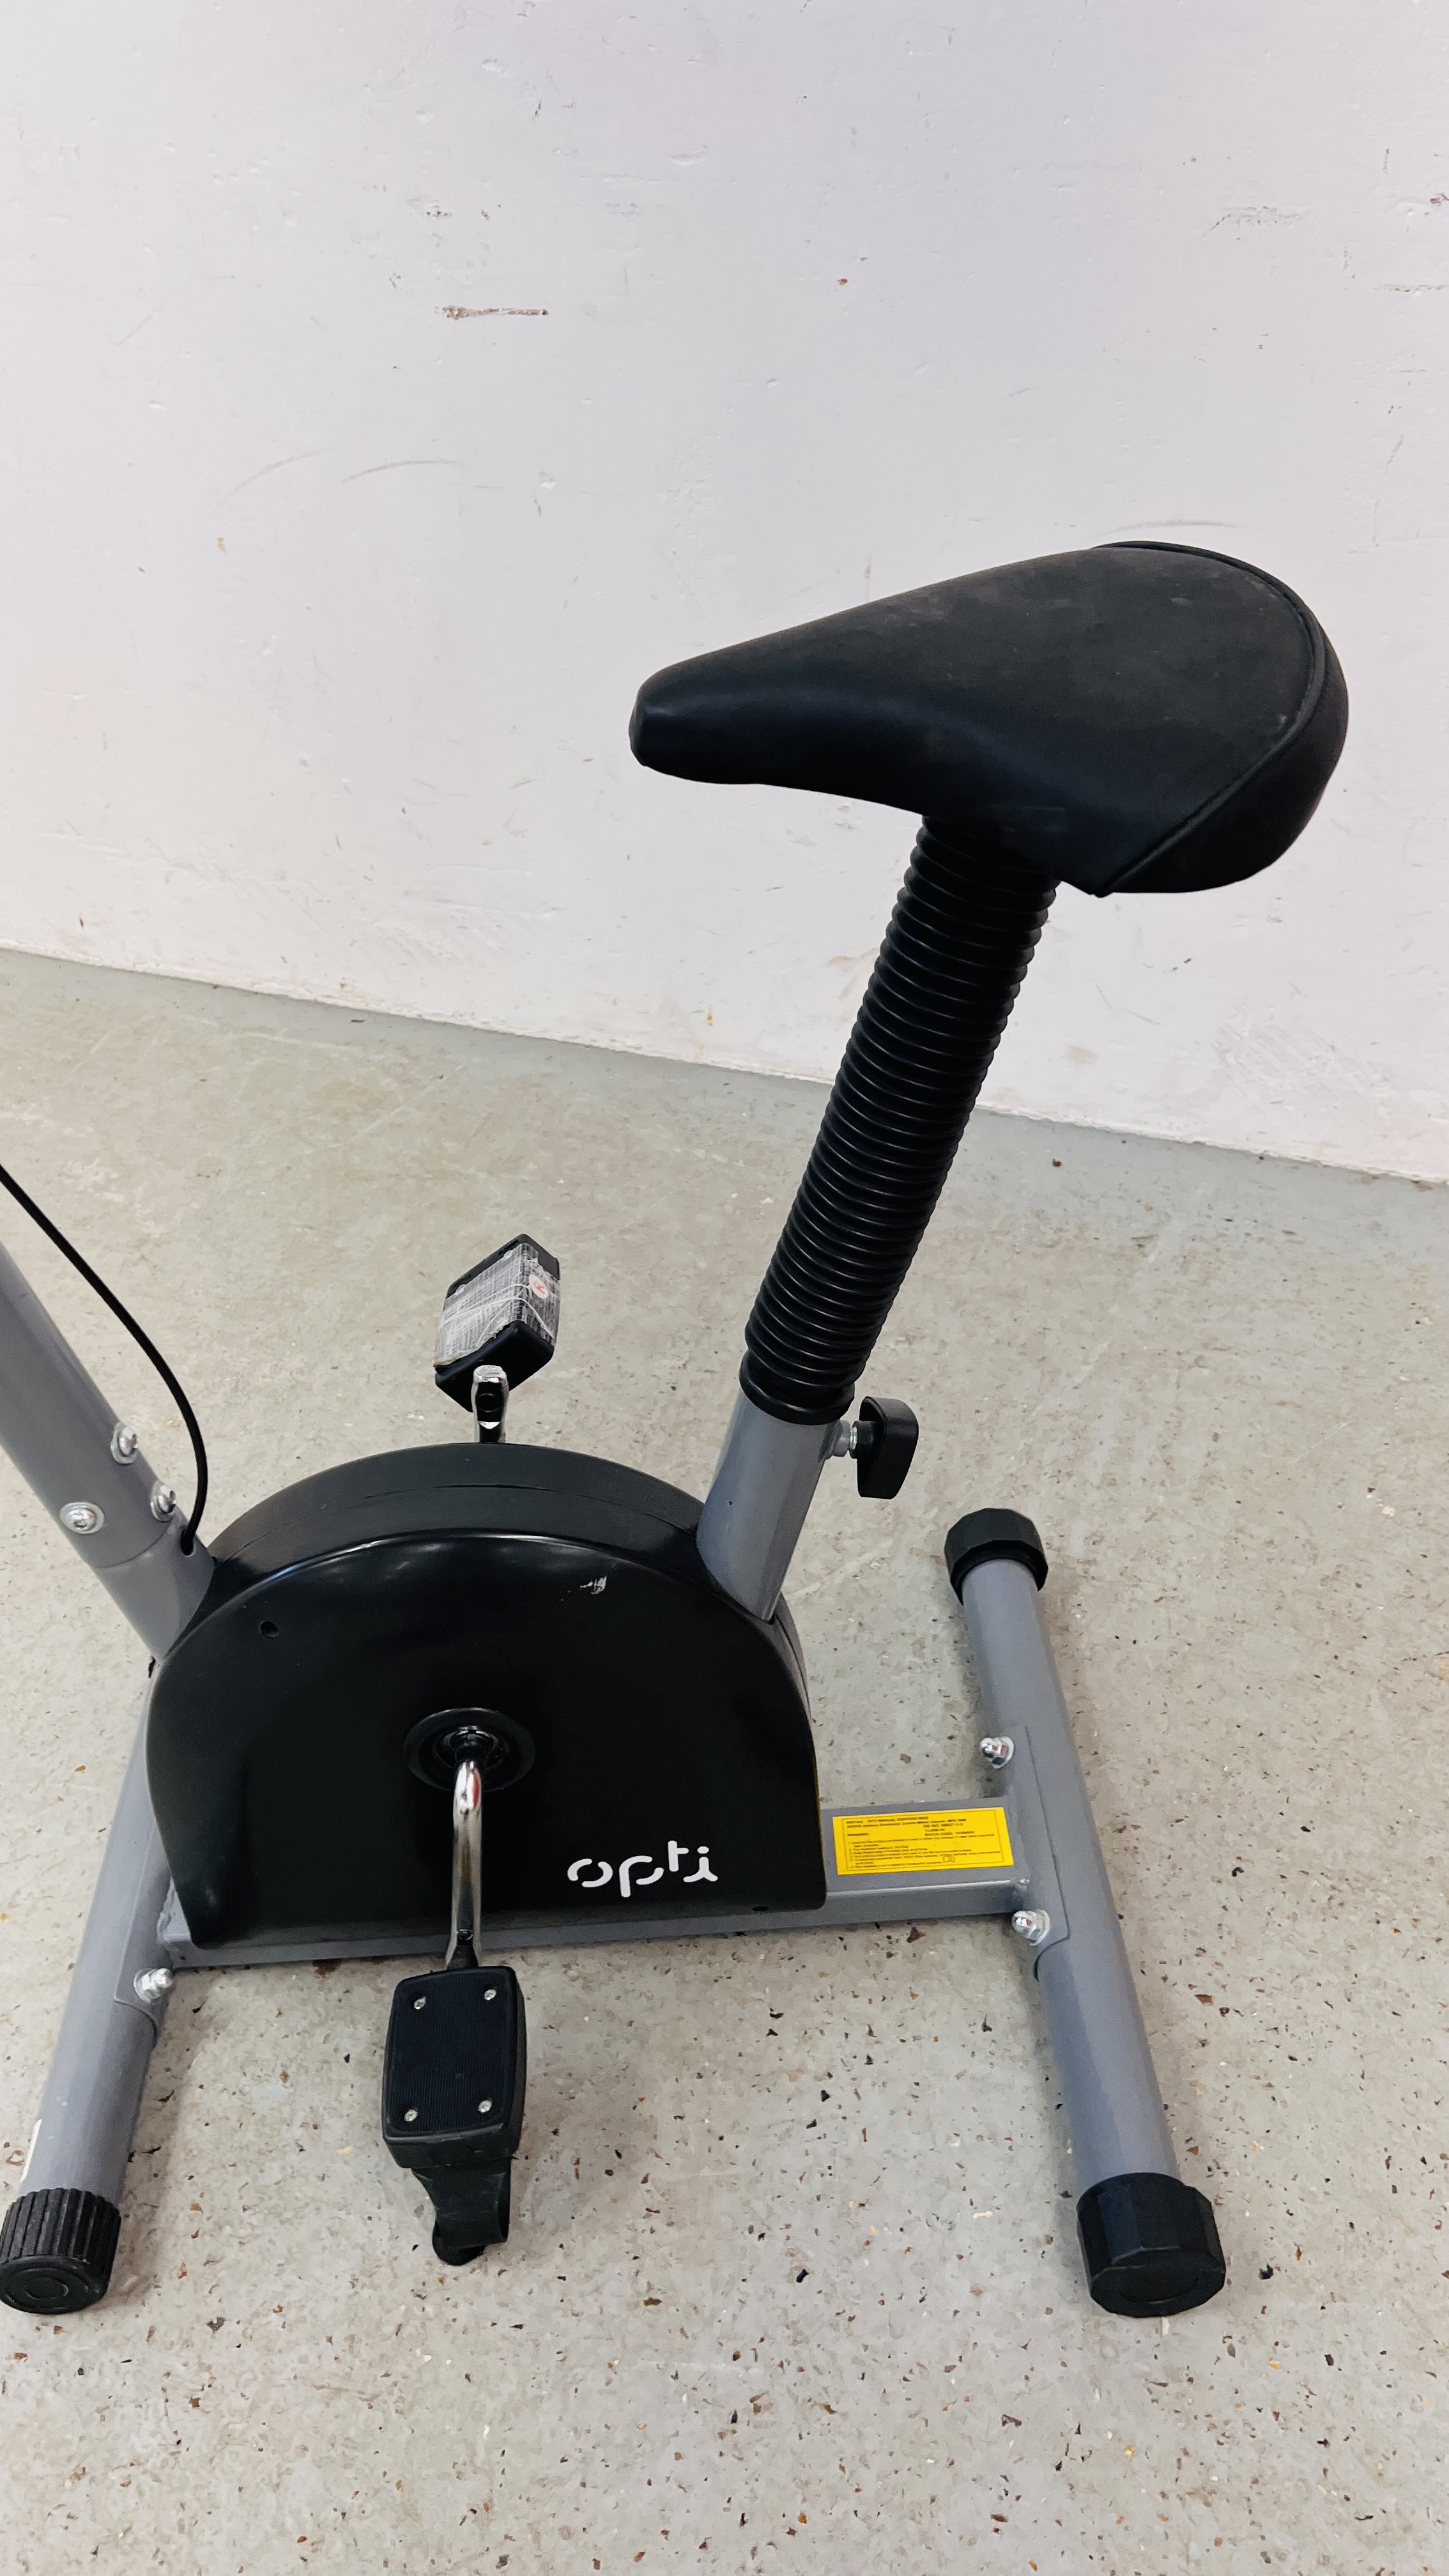 AN OPTI EXERCISE BIKE - SOLD AS SEEN - Image 4 of 5